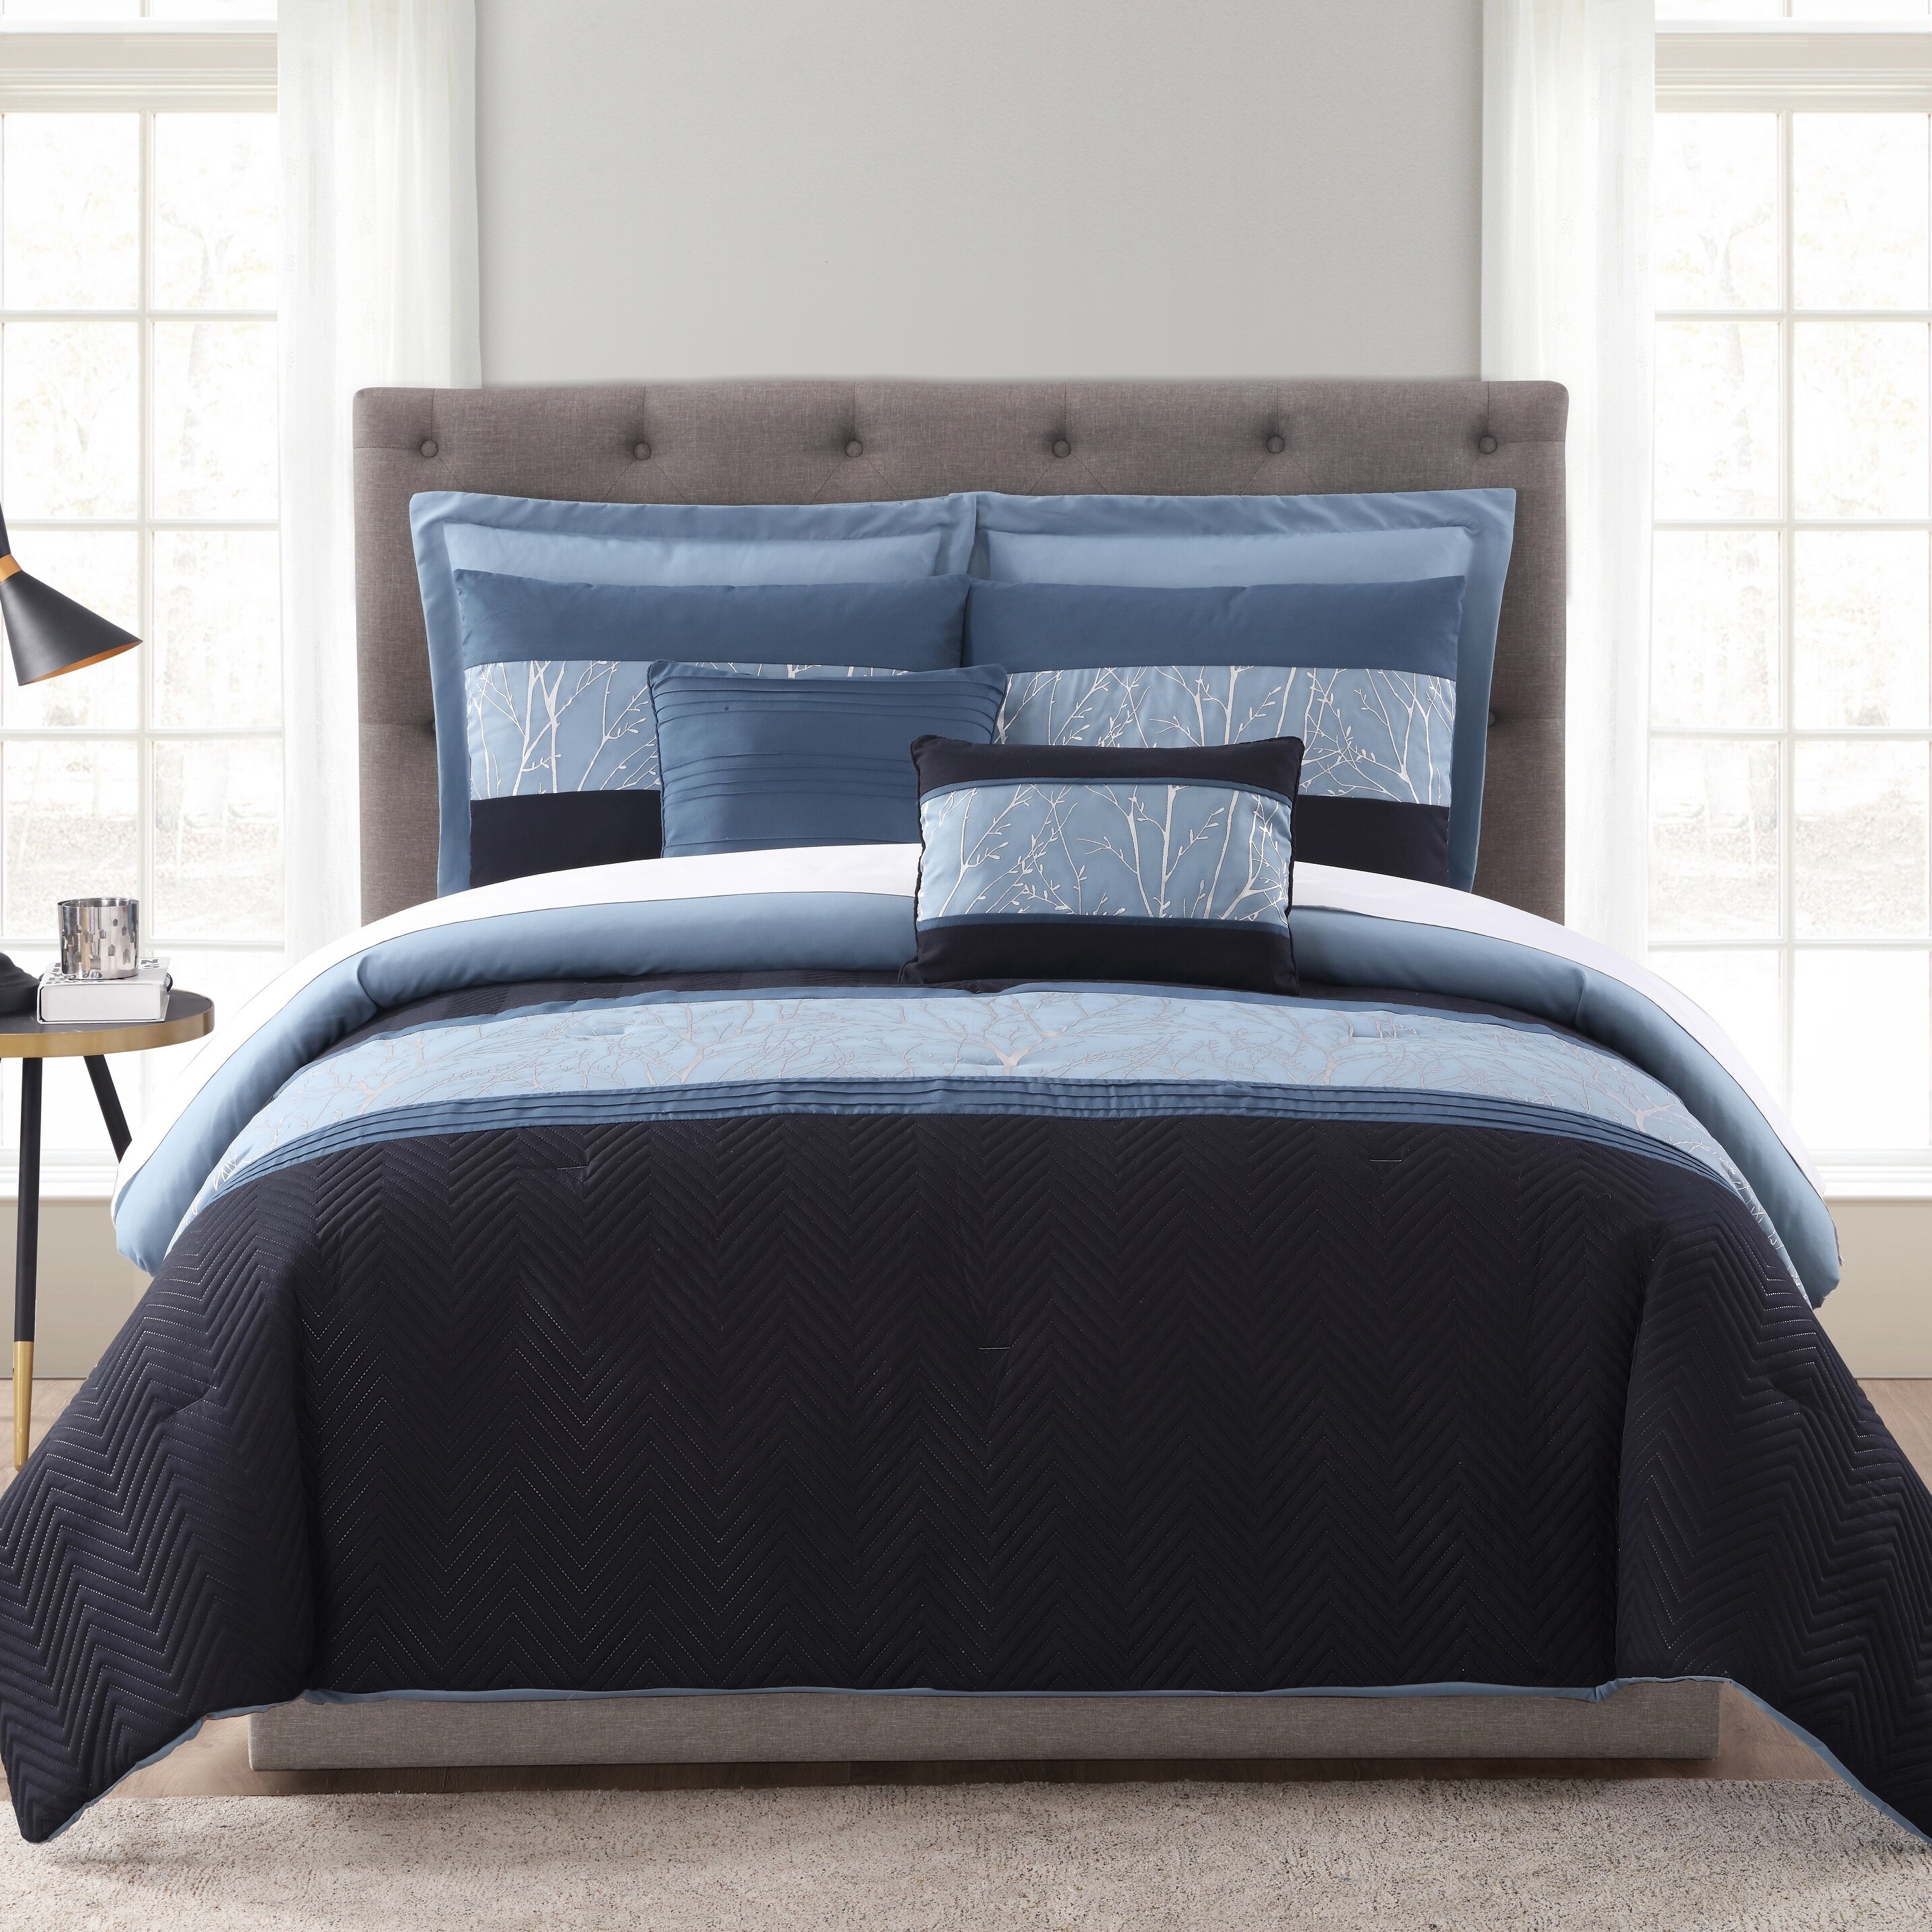 Blue And Silver Comforter Sets | Twin Bedding Sets 2020